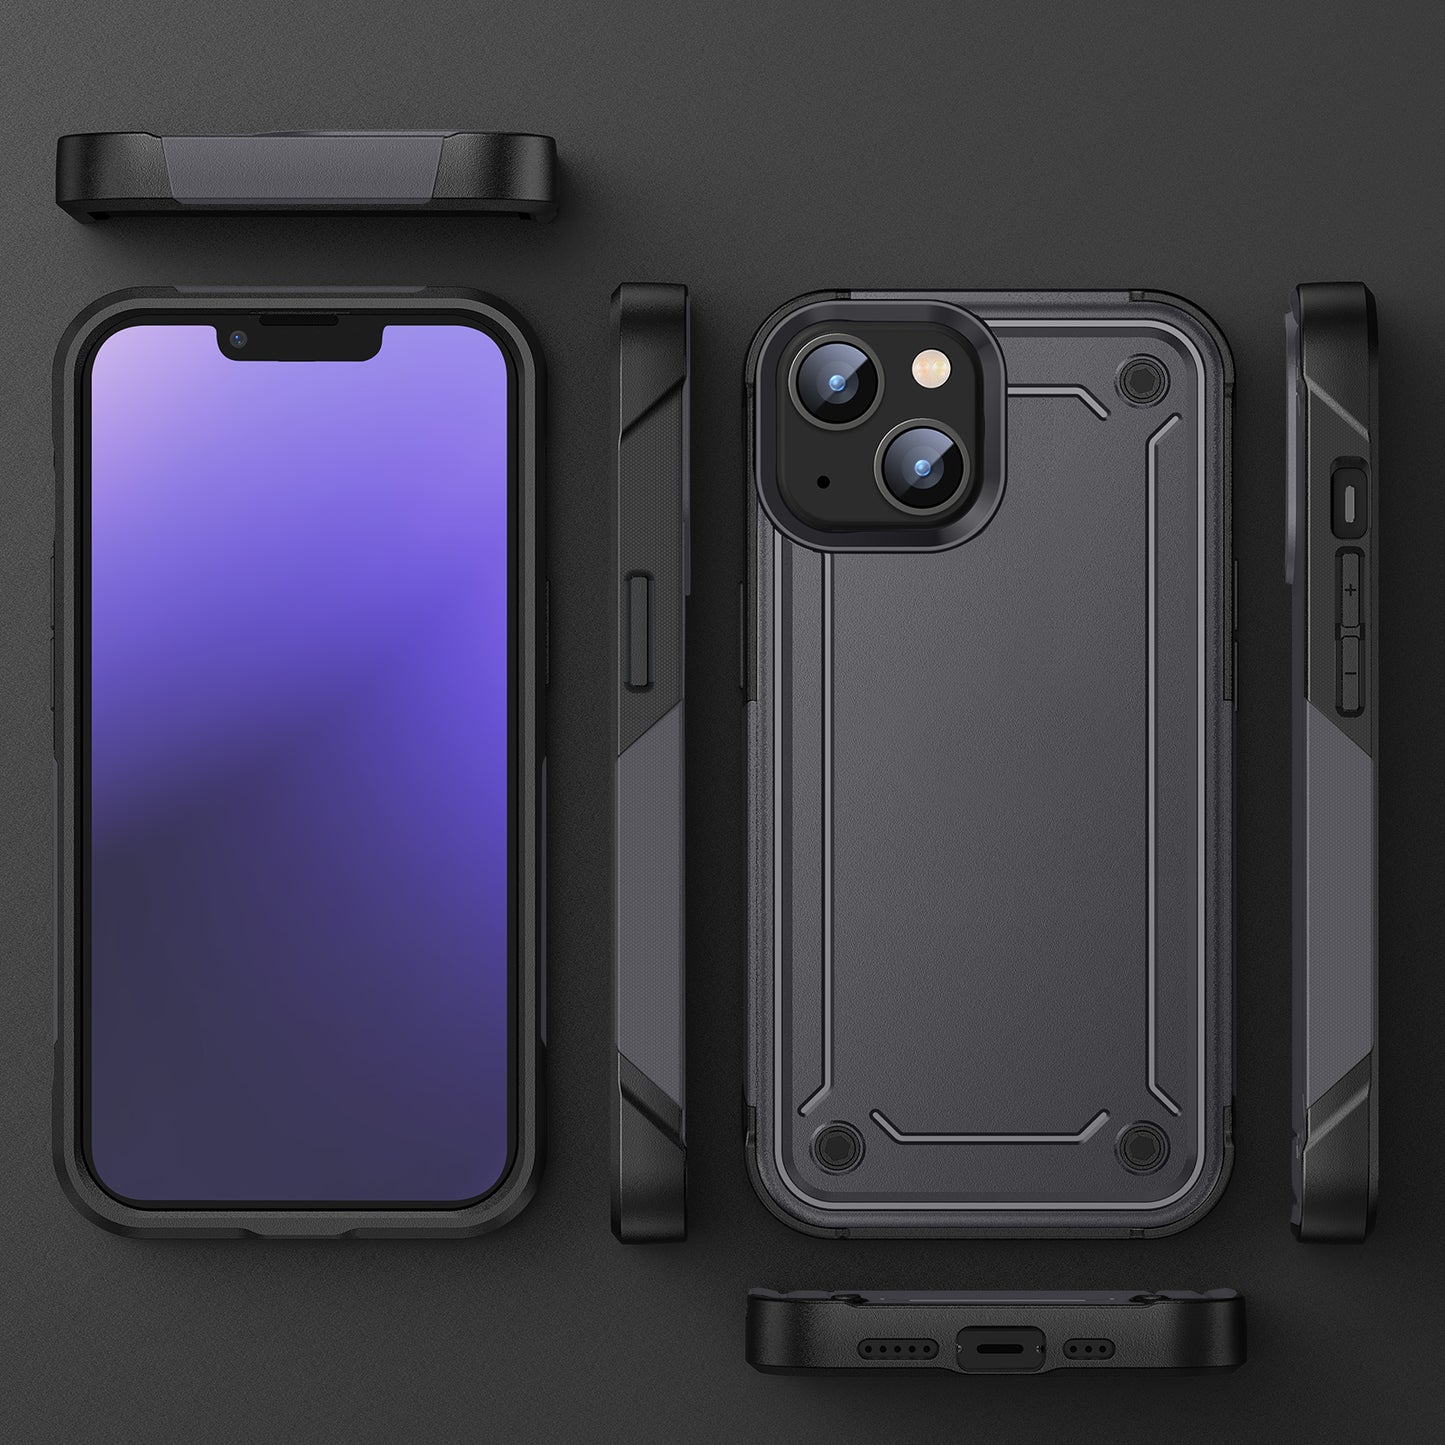 heavy duty hard shockproof armor case fashion black feel phone case for iphone 11 pro max